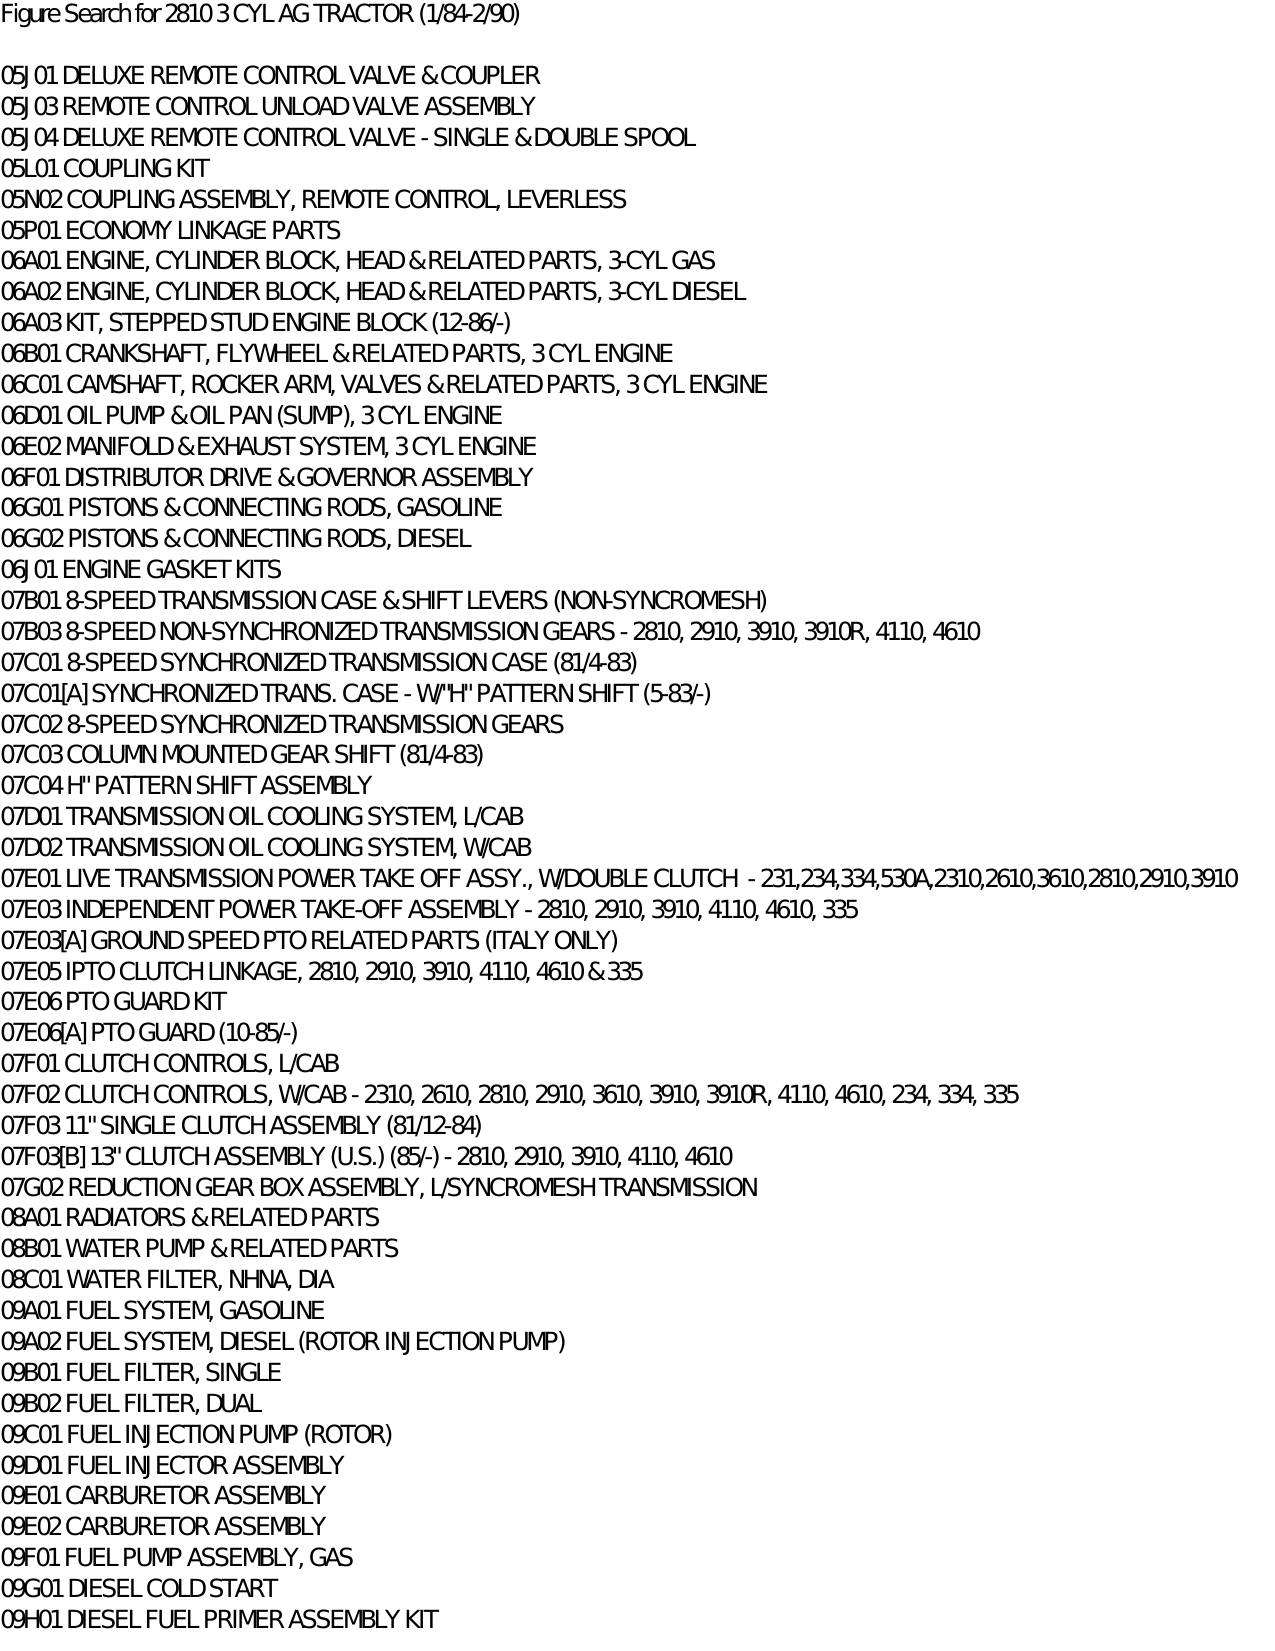 Ford 2810 utility tractor parts list Preview image 4